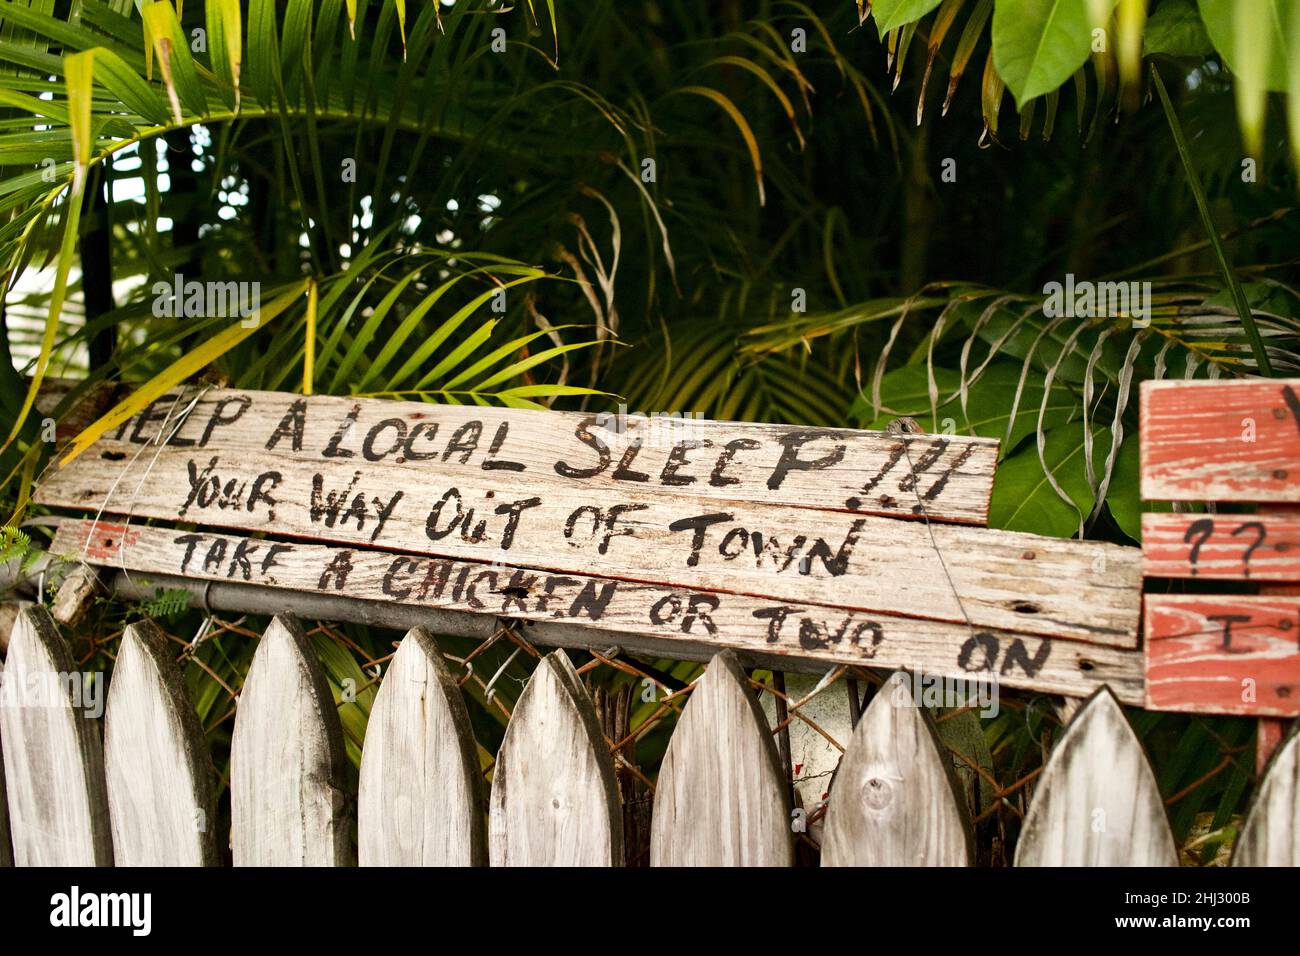 Humorous sign in Key West, Florida, FL USA. “Take a Chicken”  Island vacation destination. Stock Photo